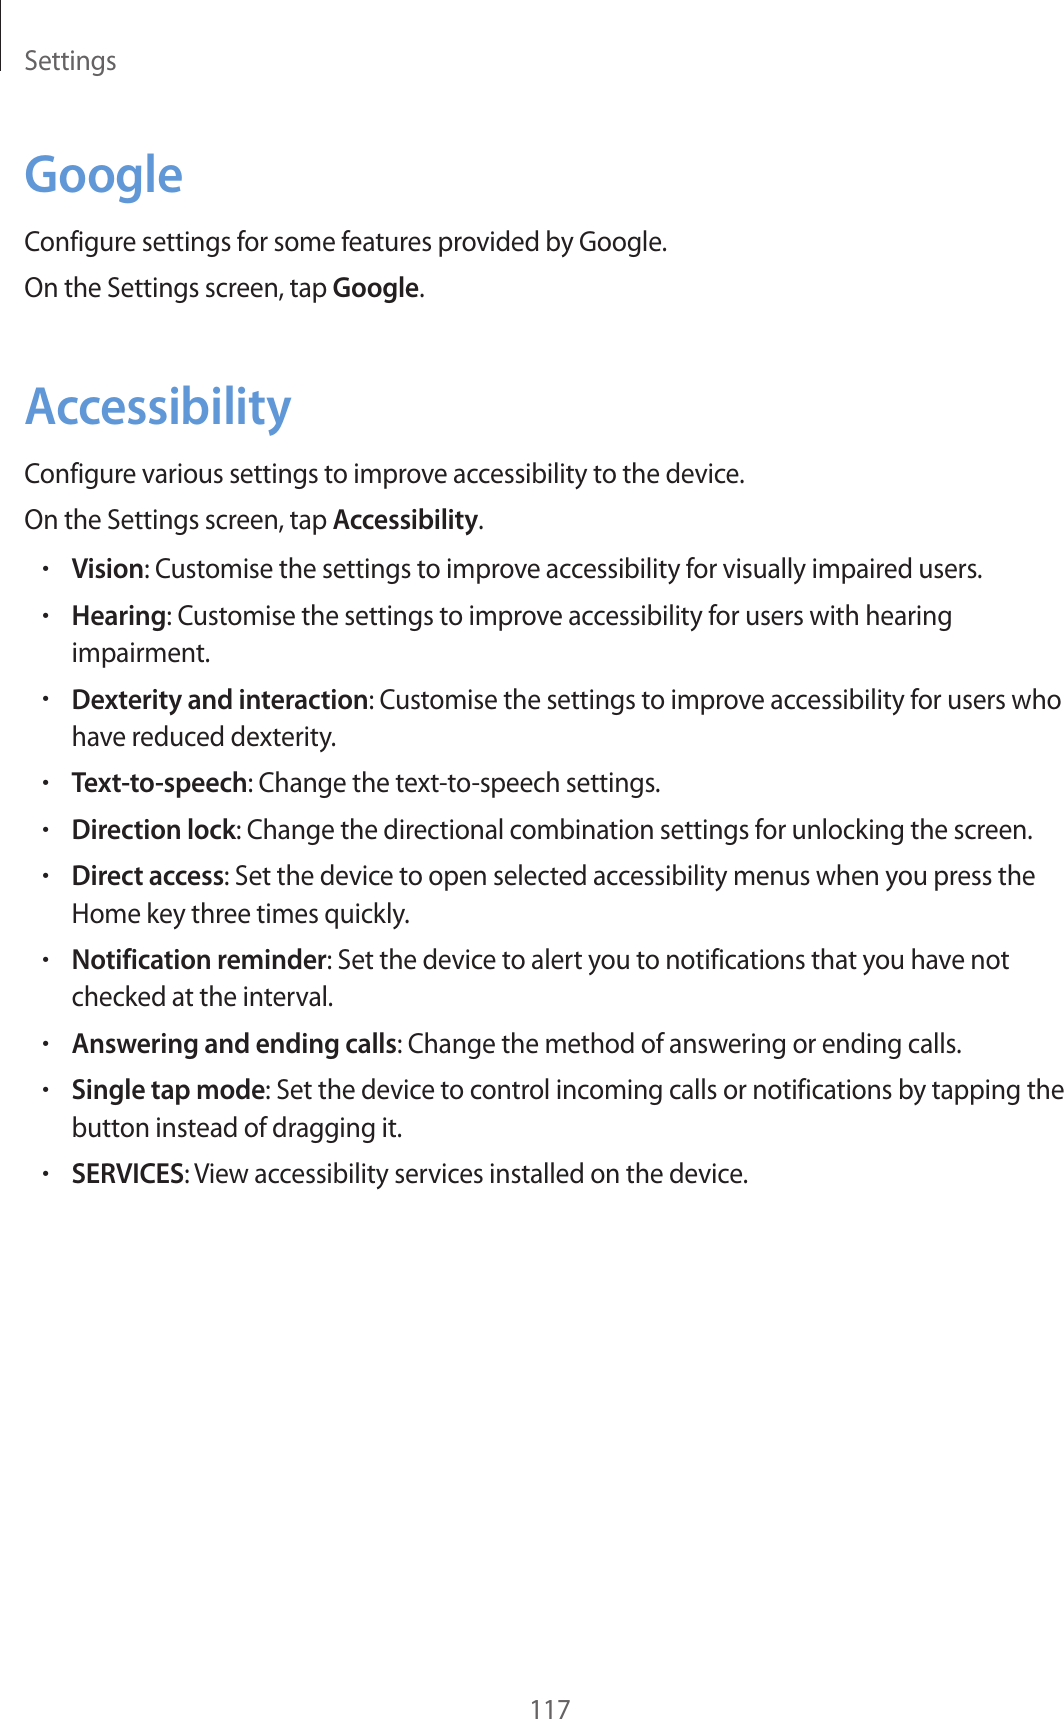 Settings117GoogleConfigure settings for some features provided by Google.On the Settings screen, tap Google.AccessibilityConfigure various settings to improve accessibility to the device.On the Settings screen, tap Accessibility.•Vision: Customise the settings to improve accessibility for visually impaired users.•Hearing: Customise the settings to improve accessibility for users with hearing impairment.•Dexterity and interaction: Customise the settings to improve accessibility for users who have reduced dexterity.•Text-to-speech: Change the text-to-speech settings.•Direction lock: Change the directional combination settings for unlocking the screen.•Direct access: Set the device to open selected accessibility menus when you press the Home key three times quickly.•Notification reminder: Set the device to alert you to notifications that you have not checked at the interval.•Answering and ending calls: Change the method of answering or ending calls.•Single tap mode: Set the device to control incoming calls or notifications by tapping the button instead of dragging it.•SERVICES: View accessibility services installed on the device.